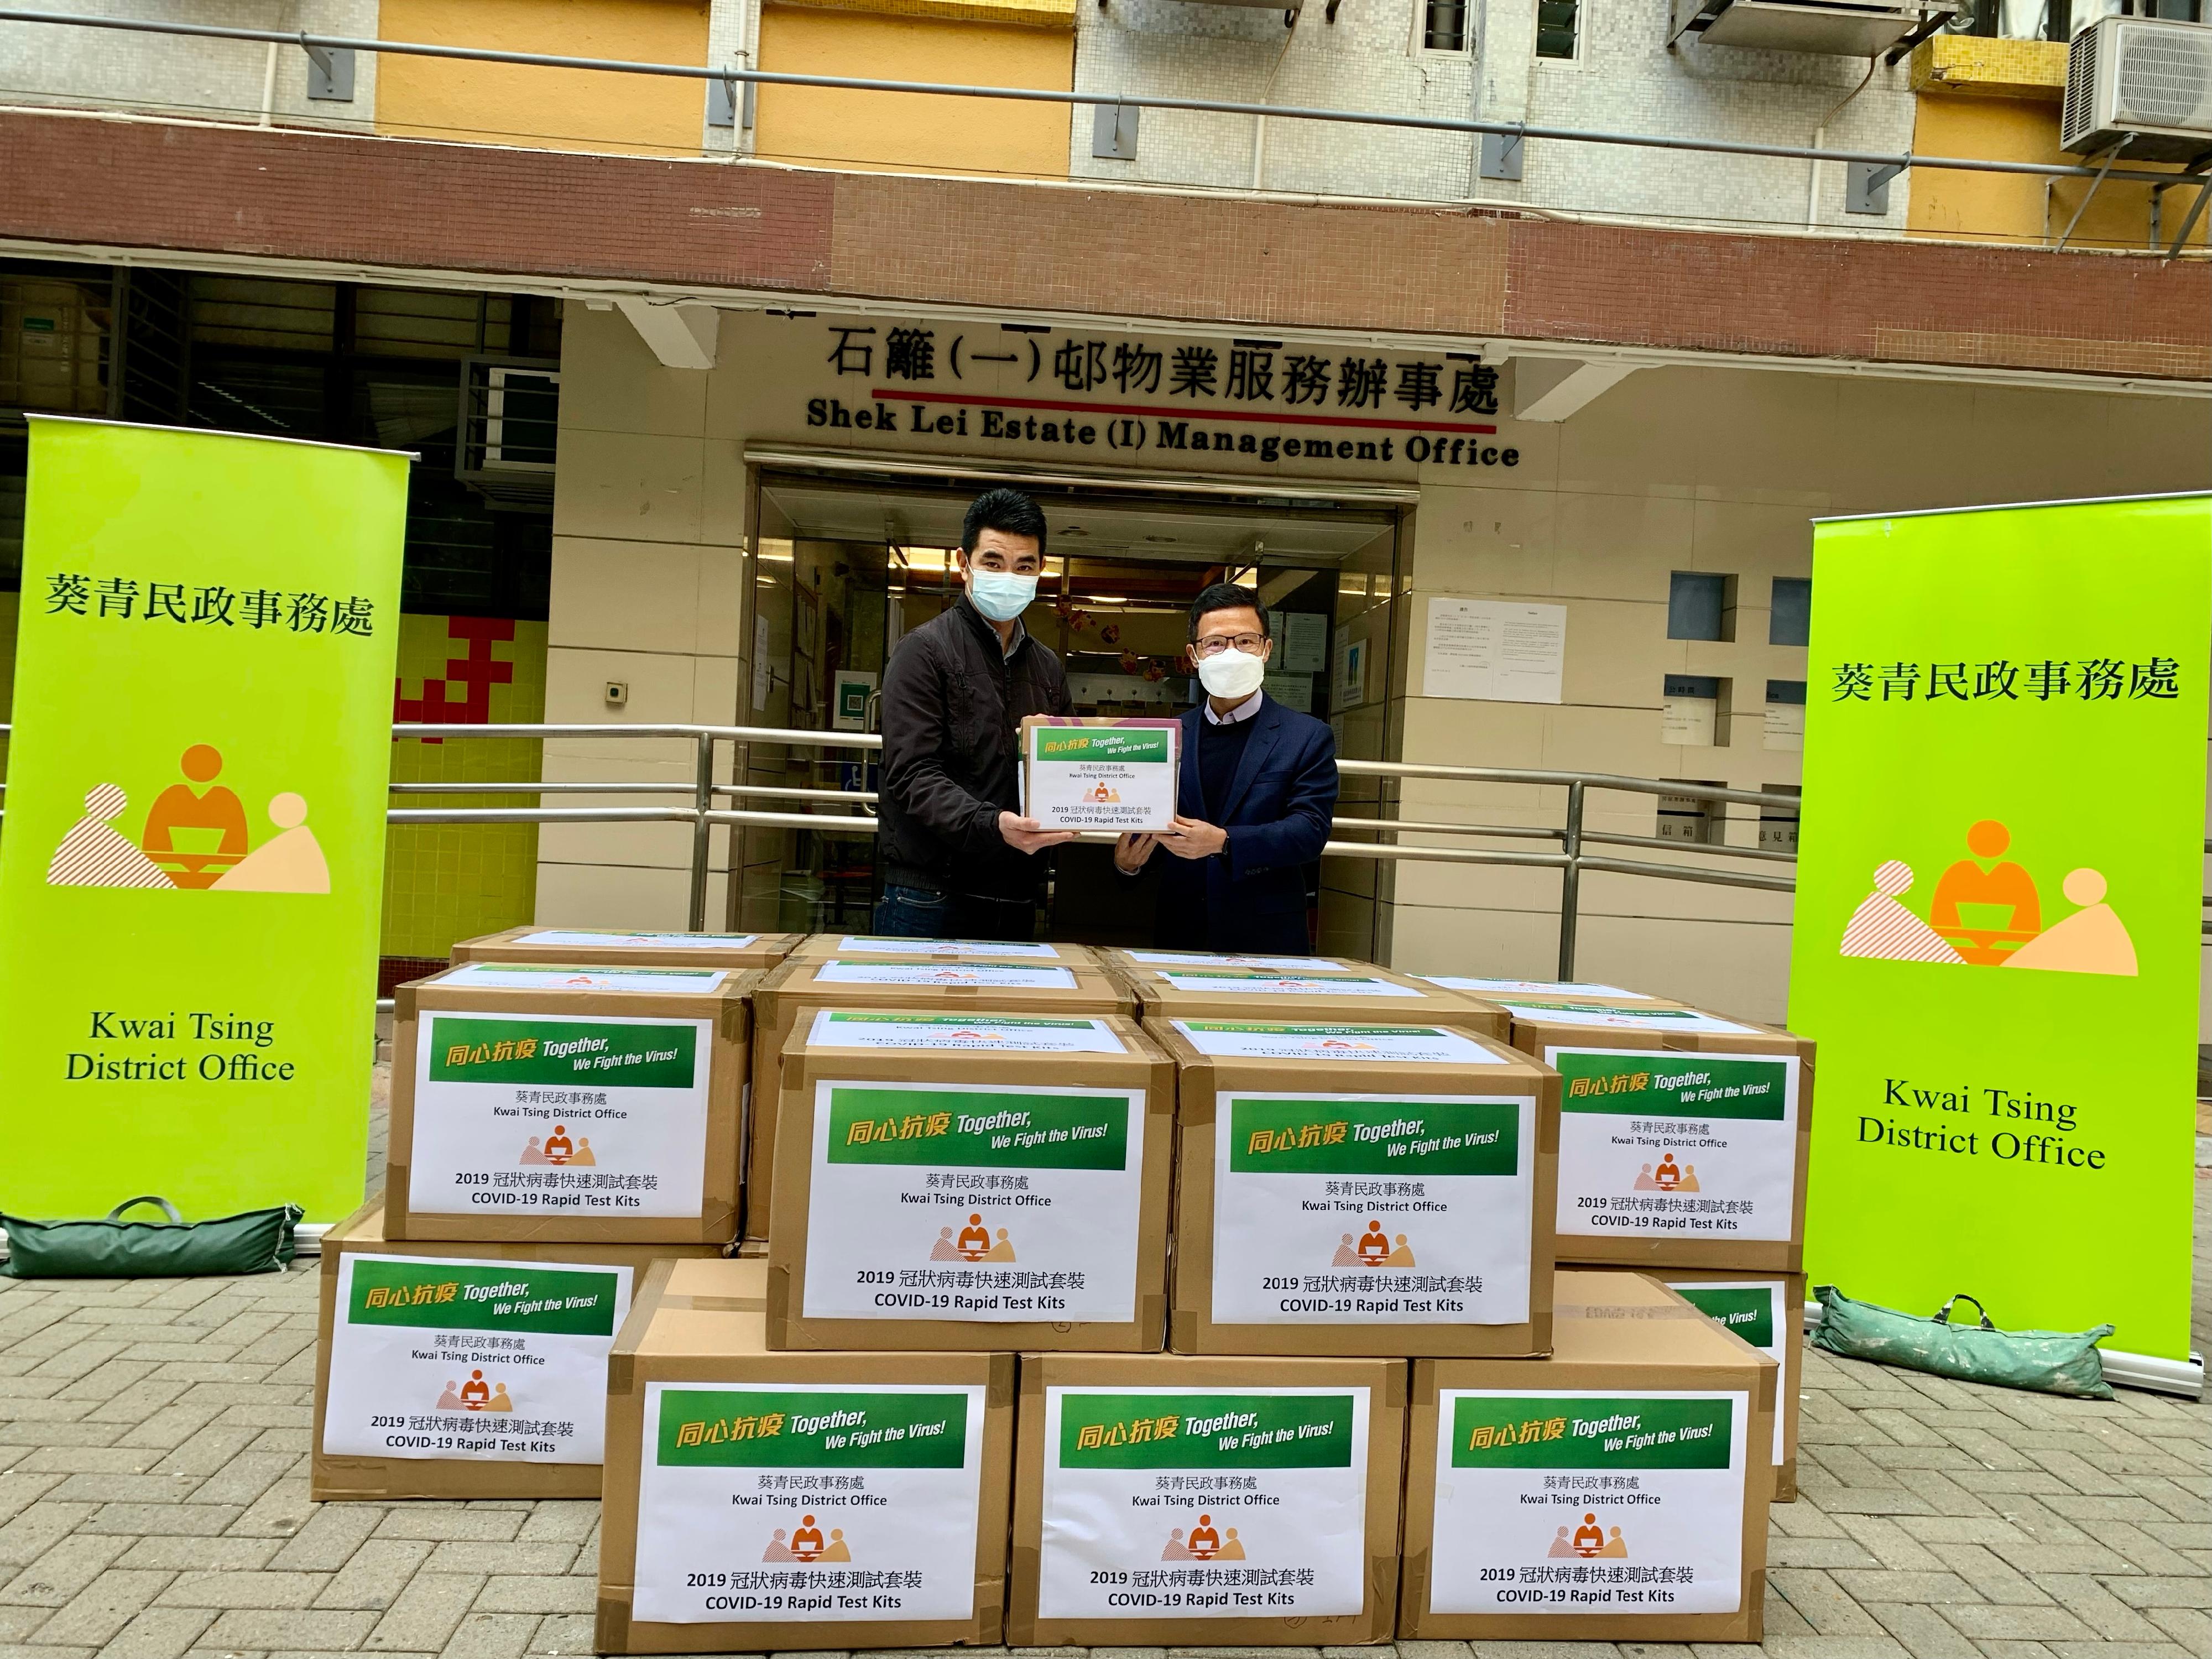 The Kwai Tsing District Office today (February 24) distributed COVID-19 rapid test kits to households, cleansing workers and property management staff living and working in Shek Lei (I) Estate in Kwai Chung for voluntary testing through the property management company.